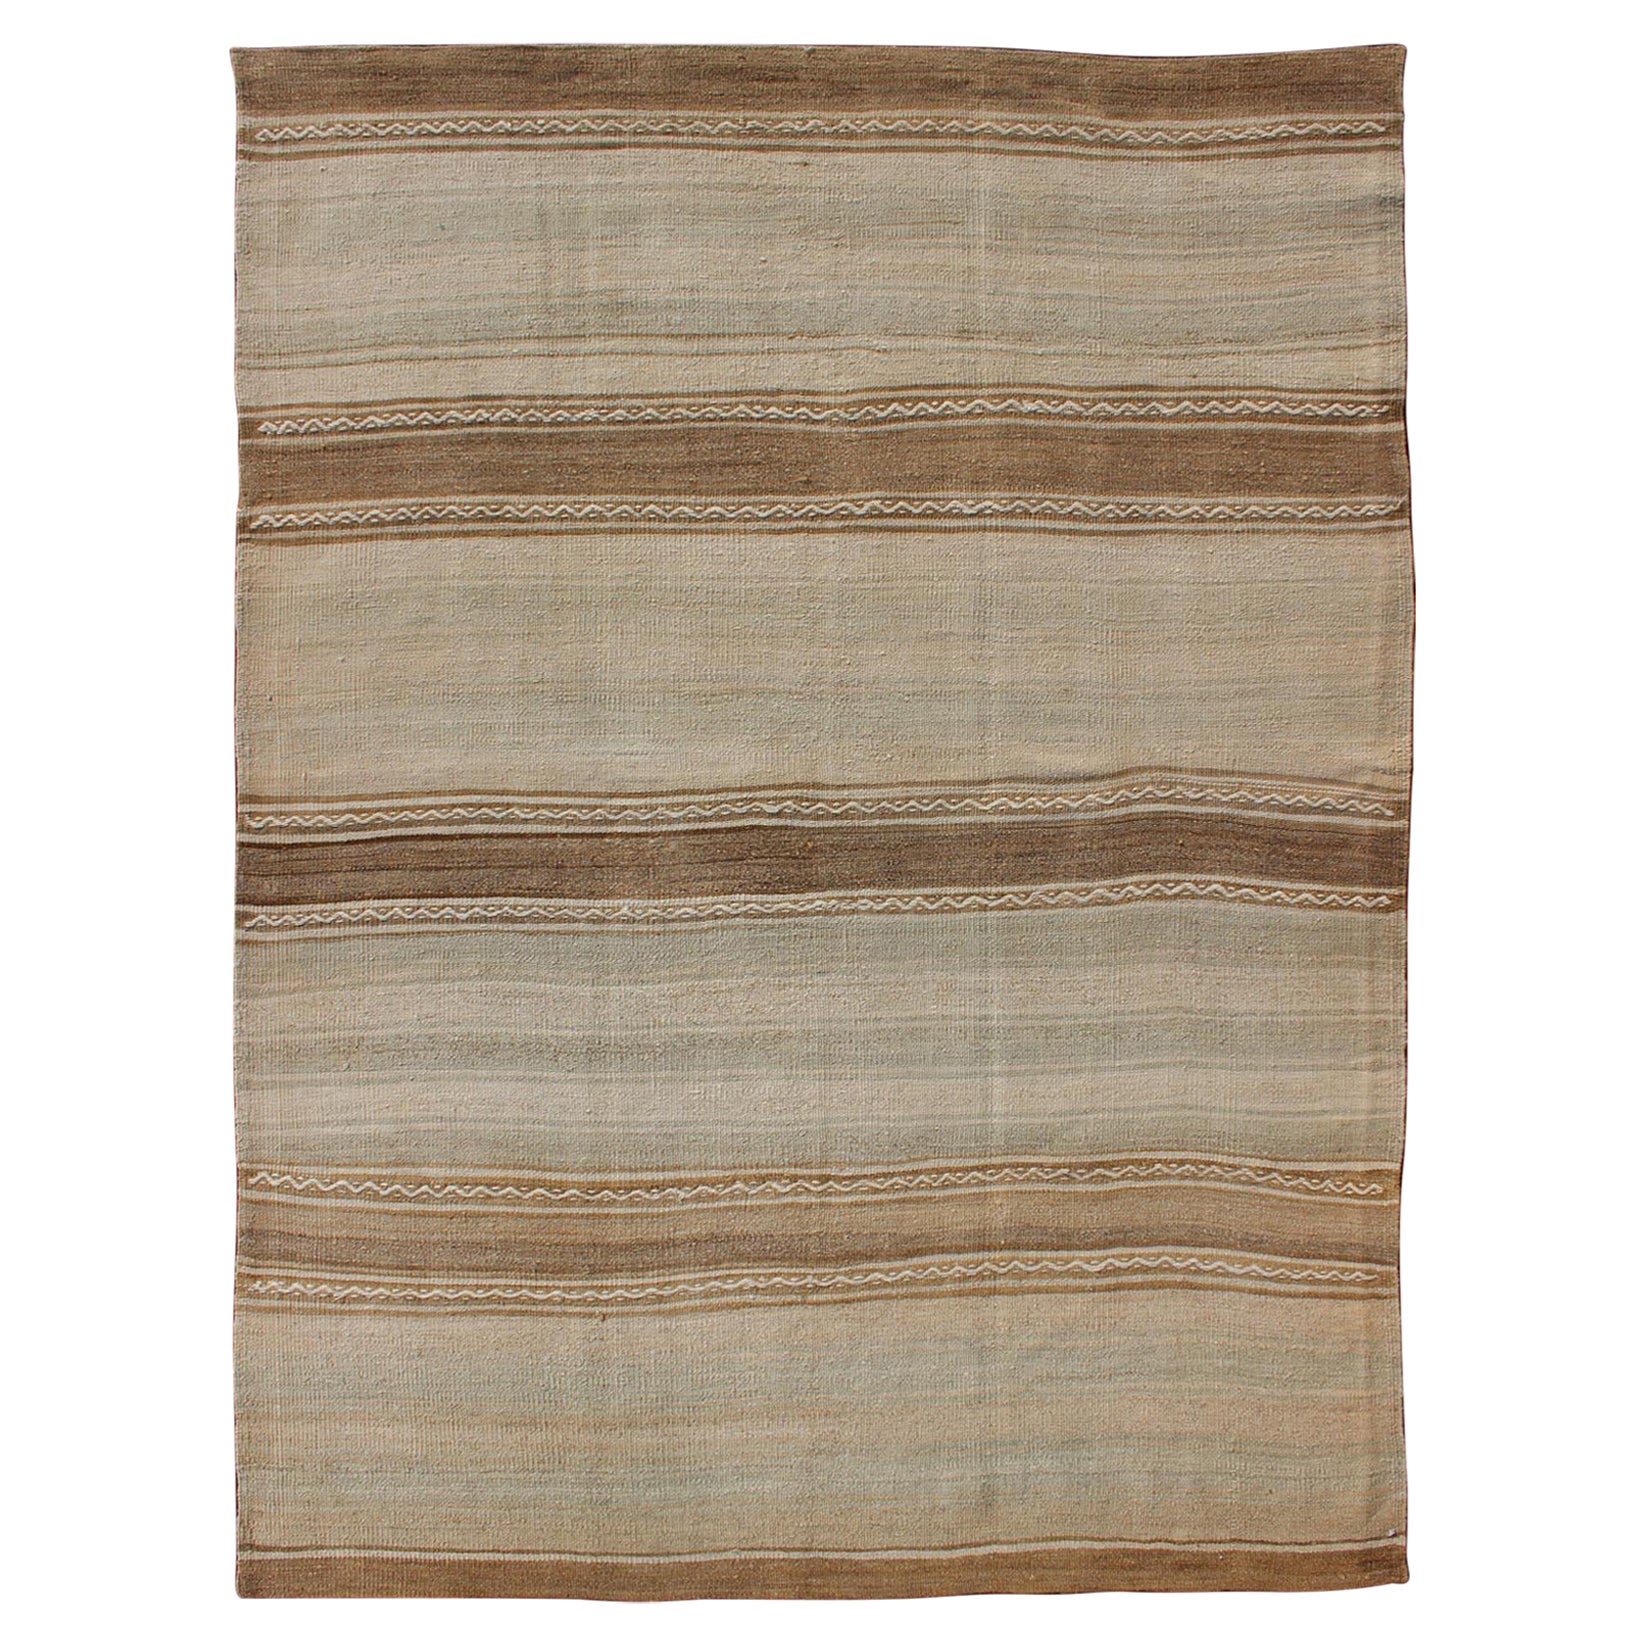 Turkish Vintage Kilim Rug with in Taupe, Brown, Faint Gray Blue, and Earth Tones For Sale